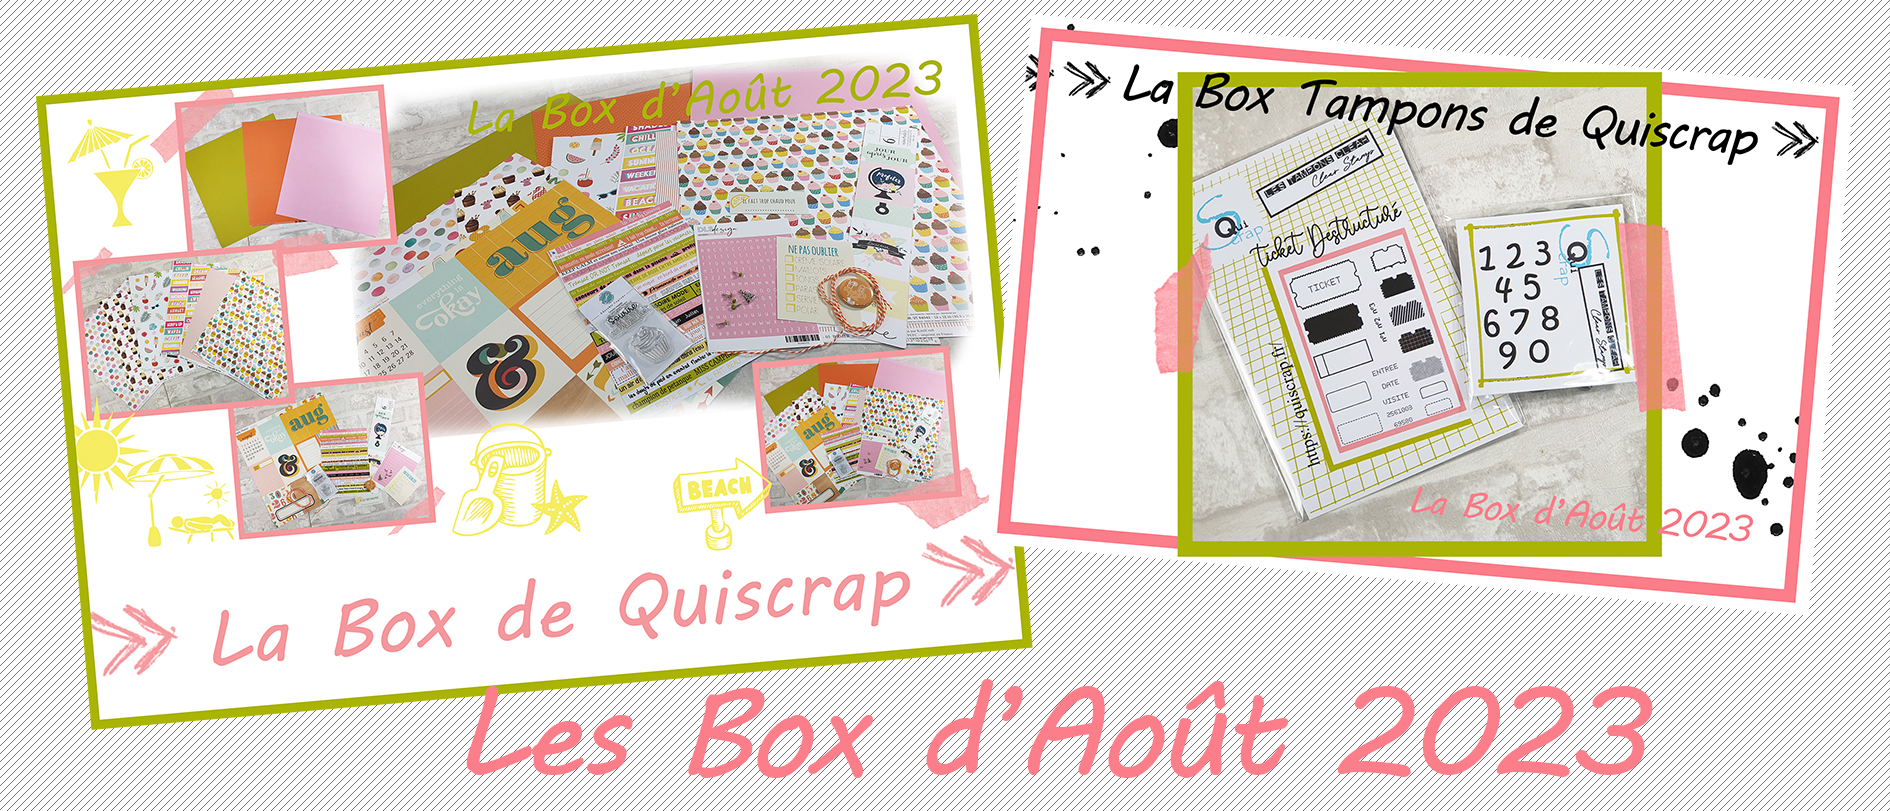 You are currently viewing Les Box d’Août 2023